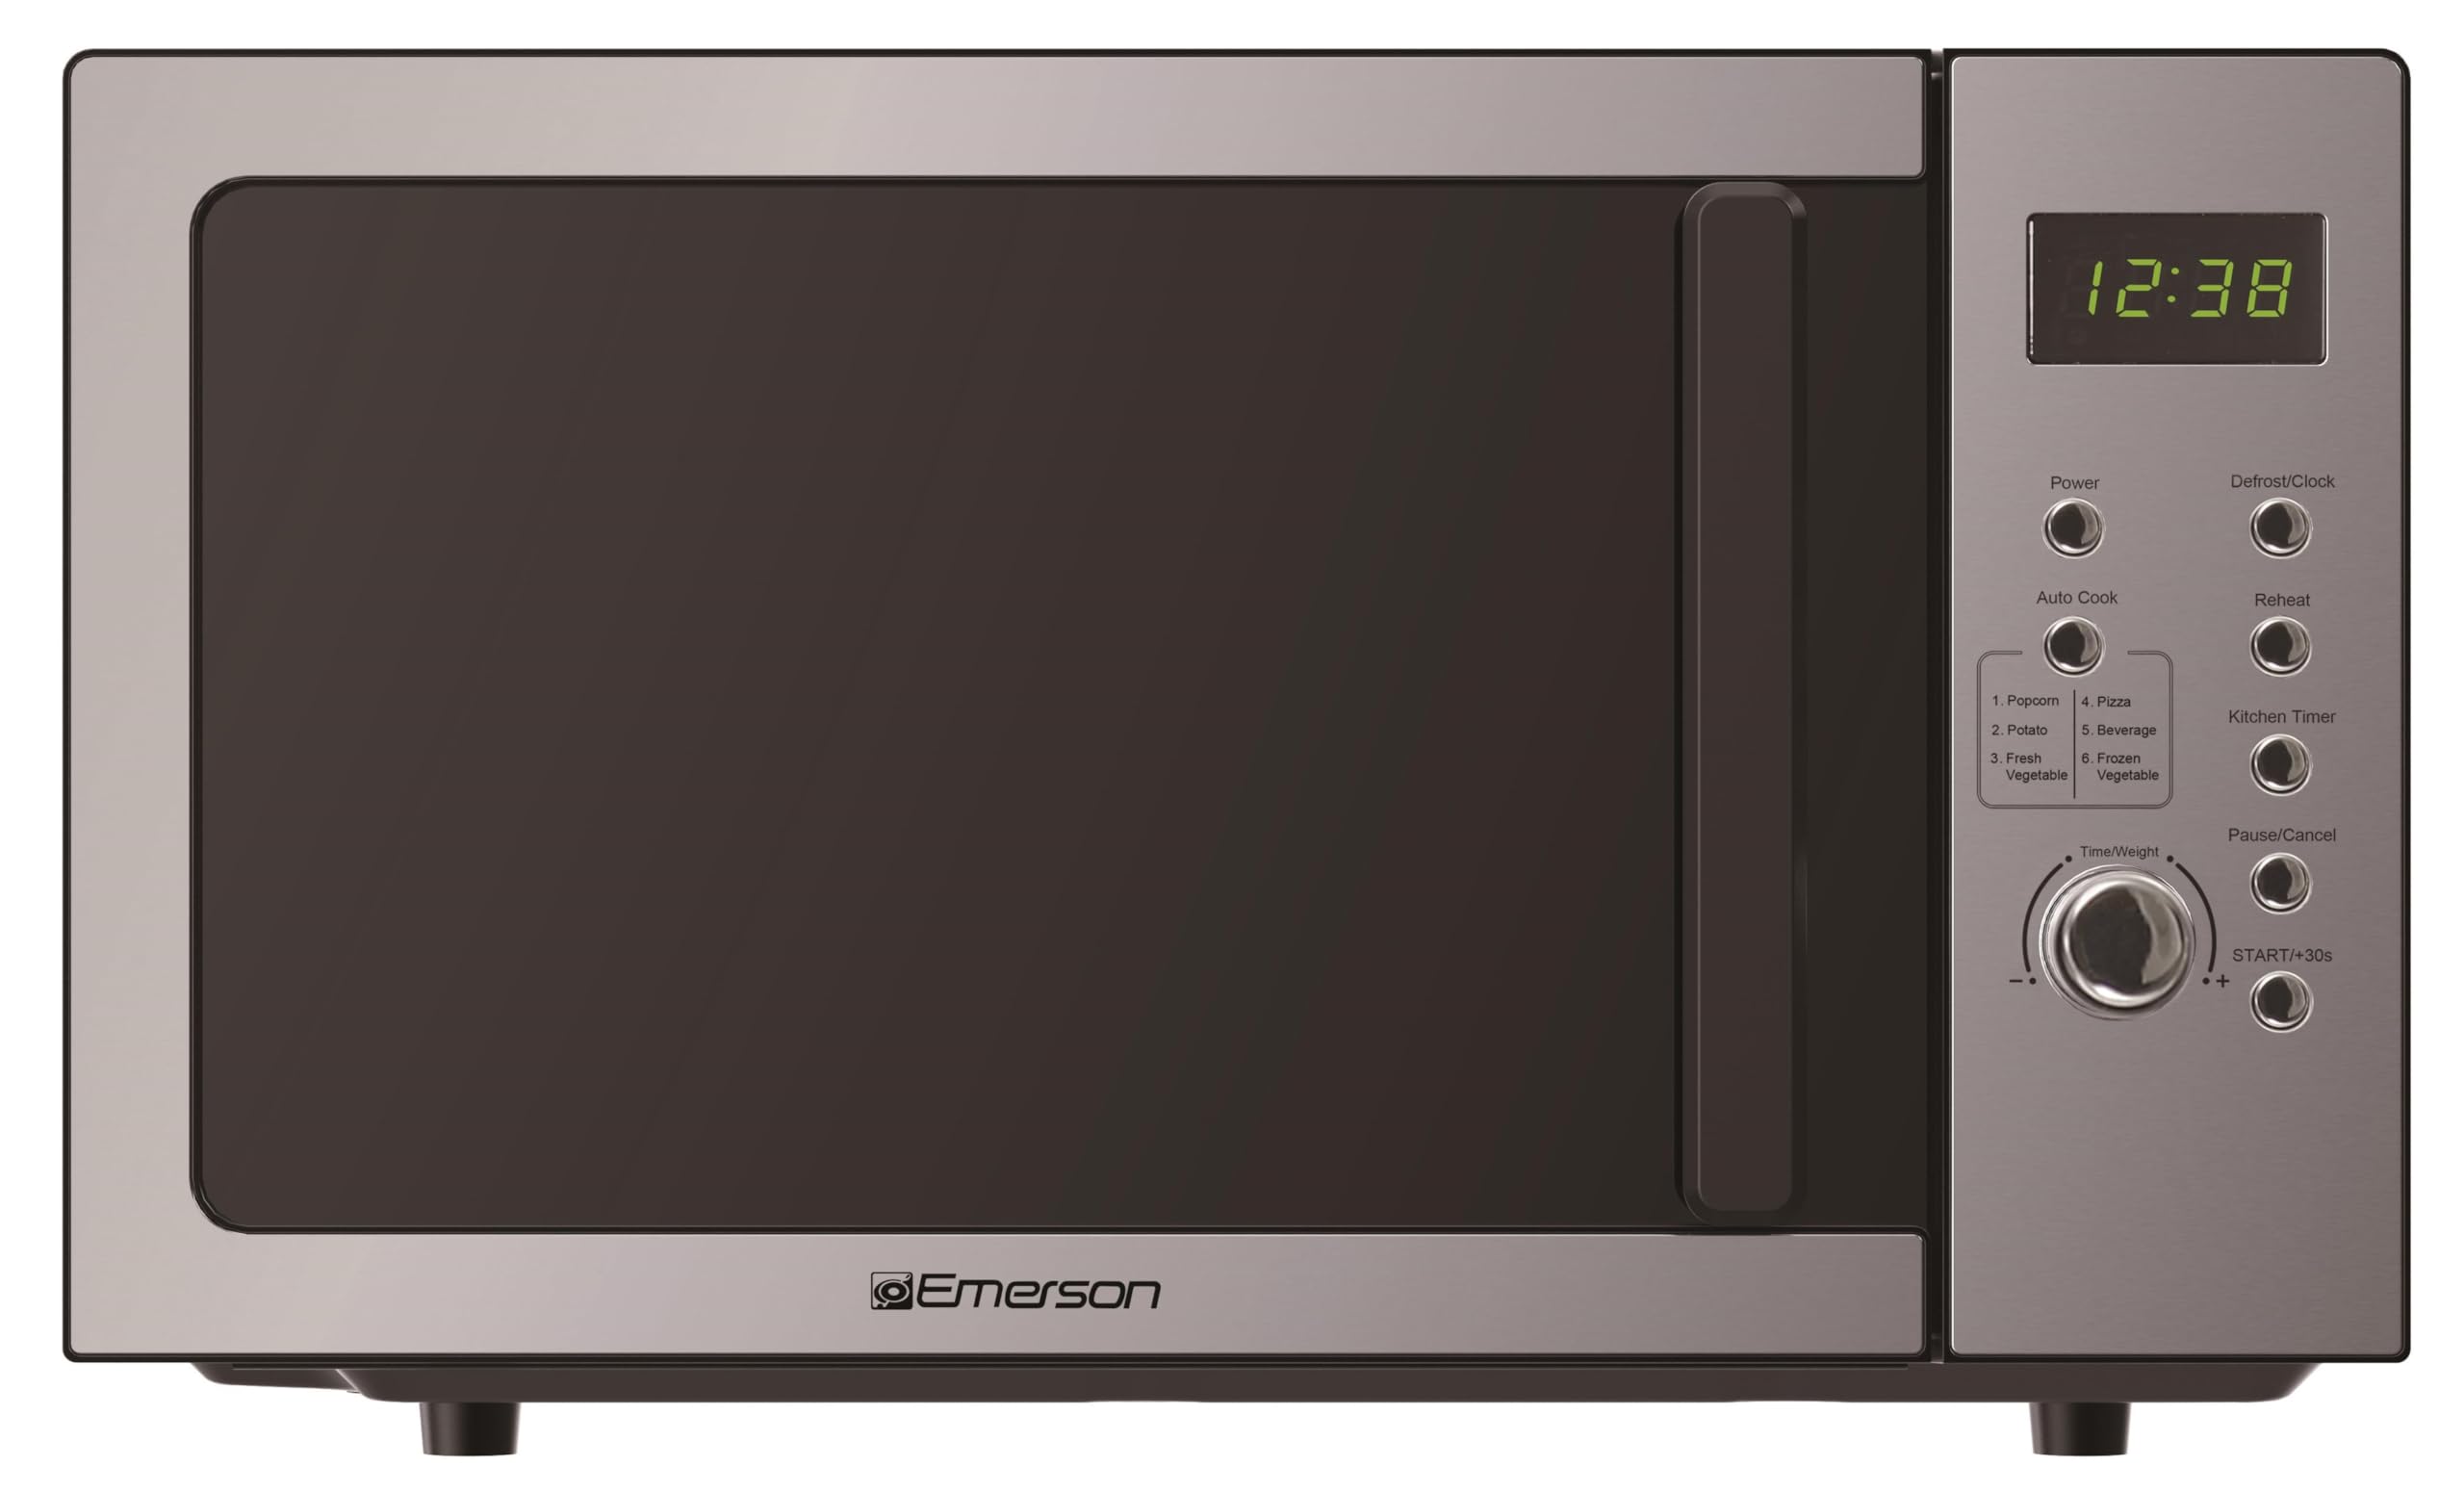 Emerson MW9005SS Microwave Oven with Timer & LED Display 900W, 5 Power Levels, 6 Pre-Programmed Settings, Removable Glass Turntable with Child Safe Lock, 0.9 Cu. Ft, Stainless Steel